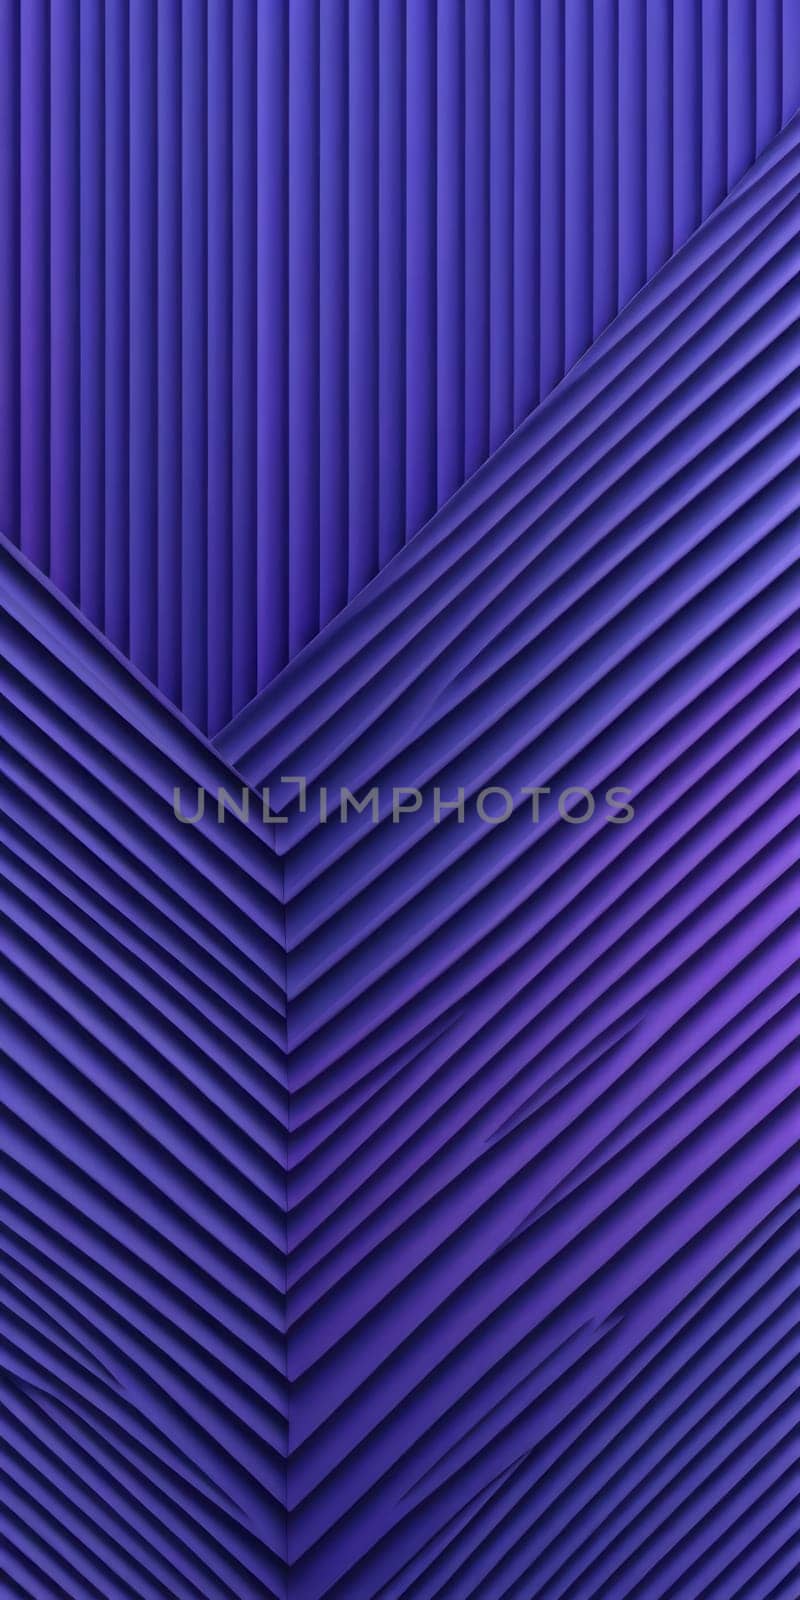 Corrugated Shapes in Navy Darkorchid by nkotlyar